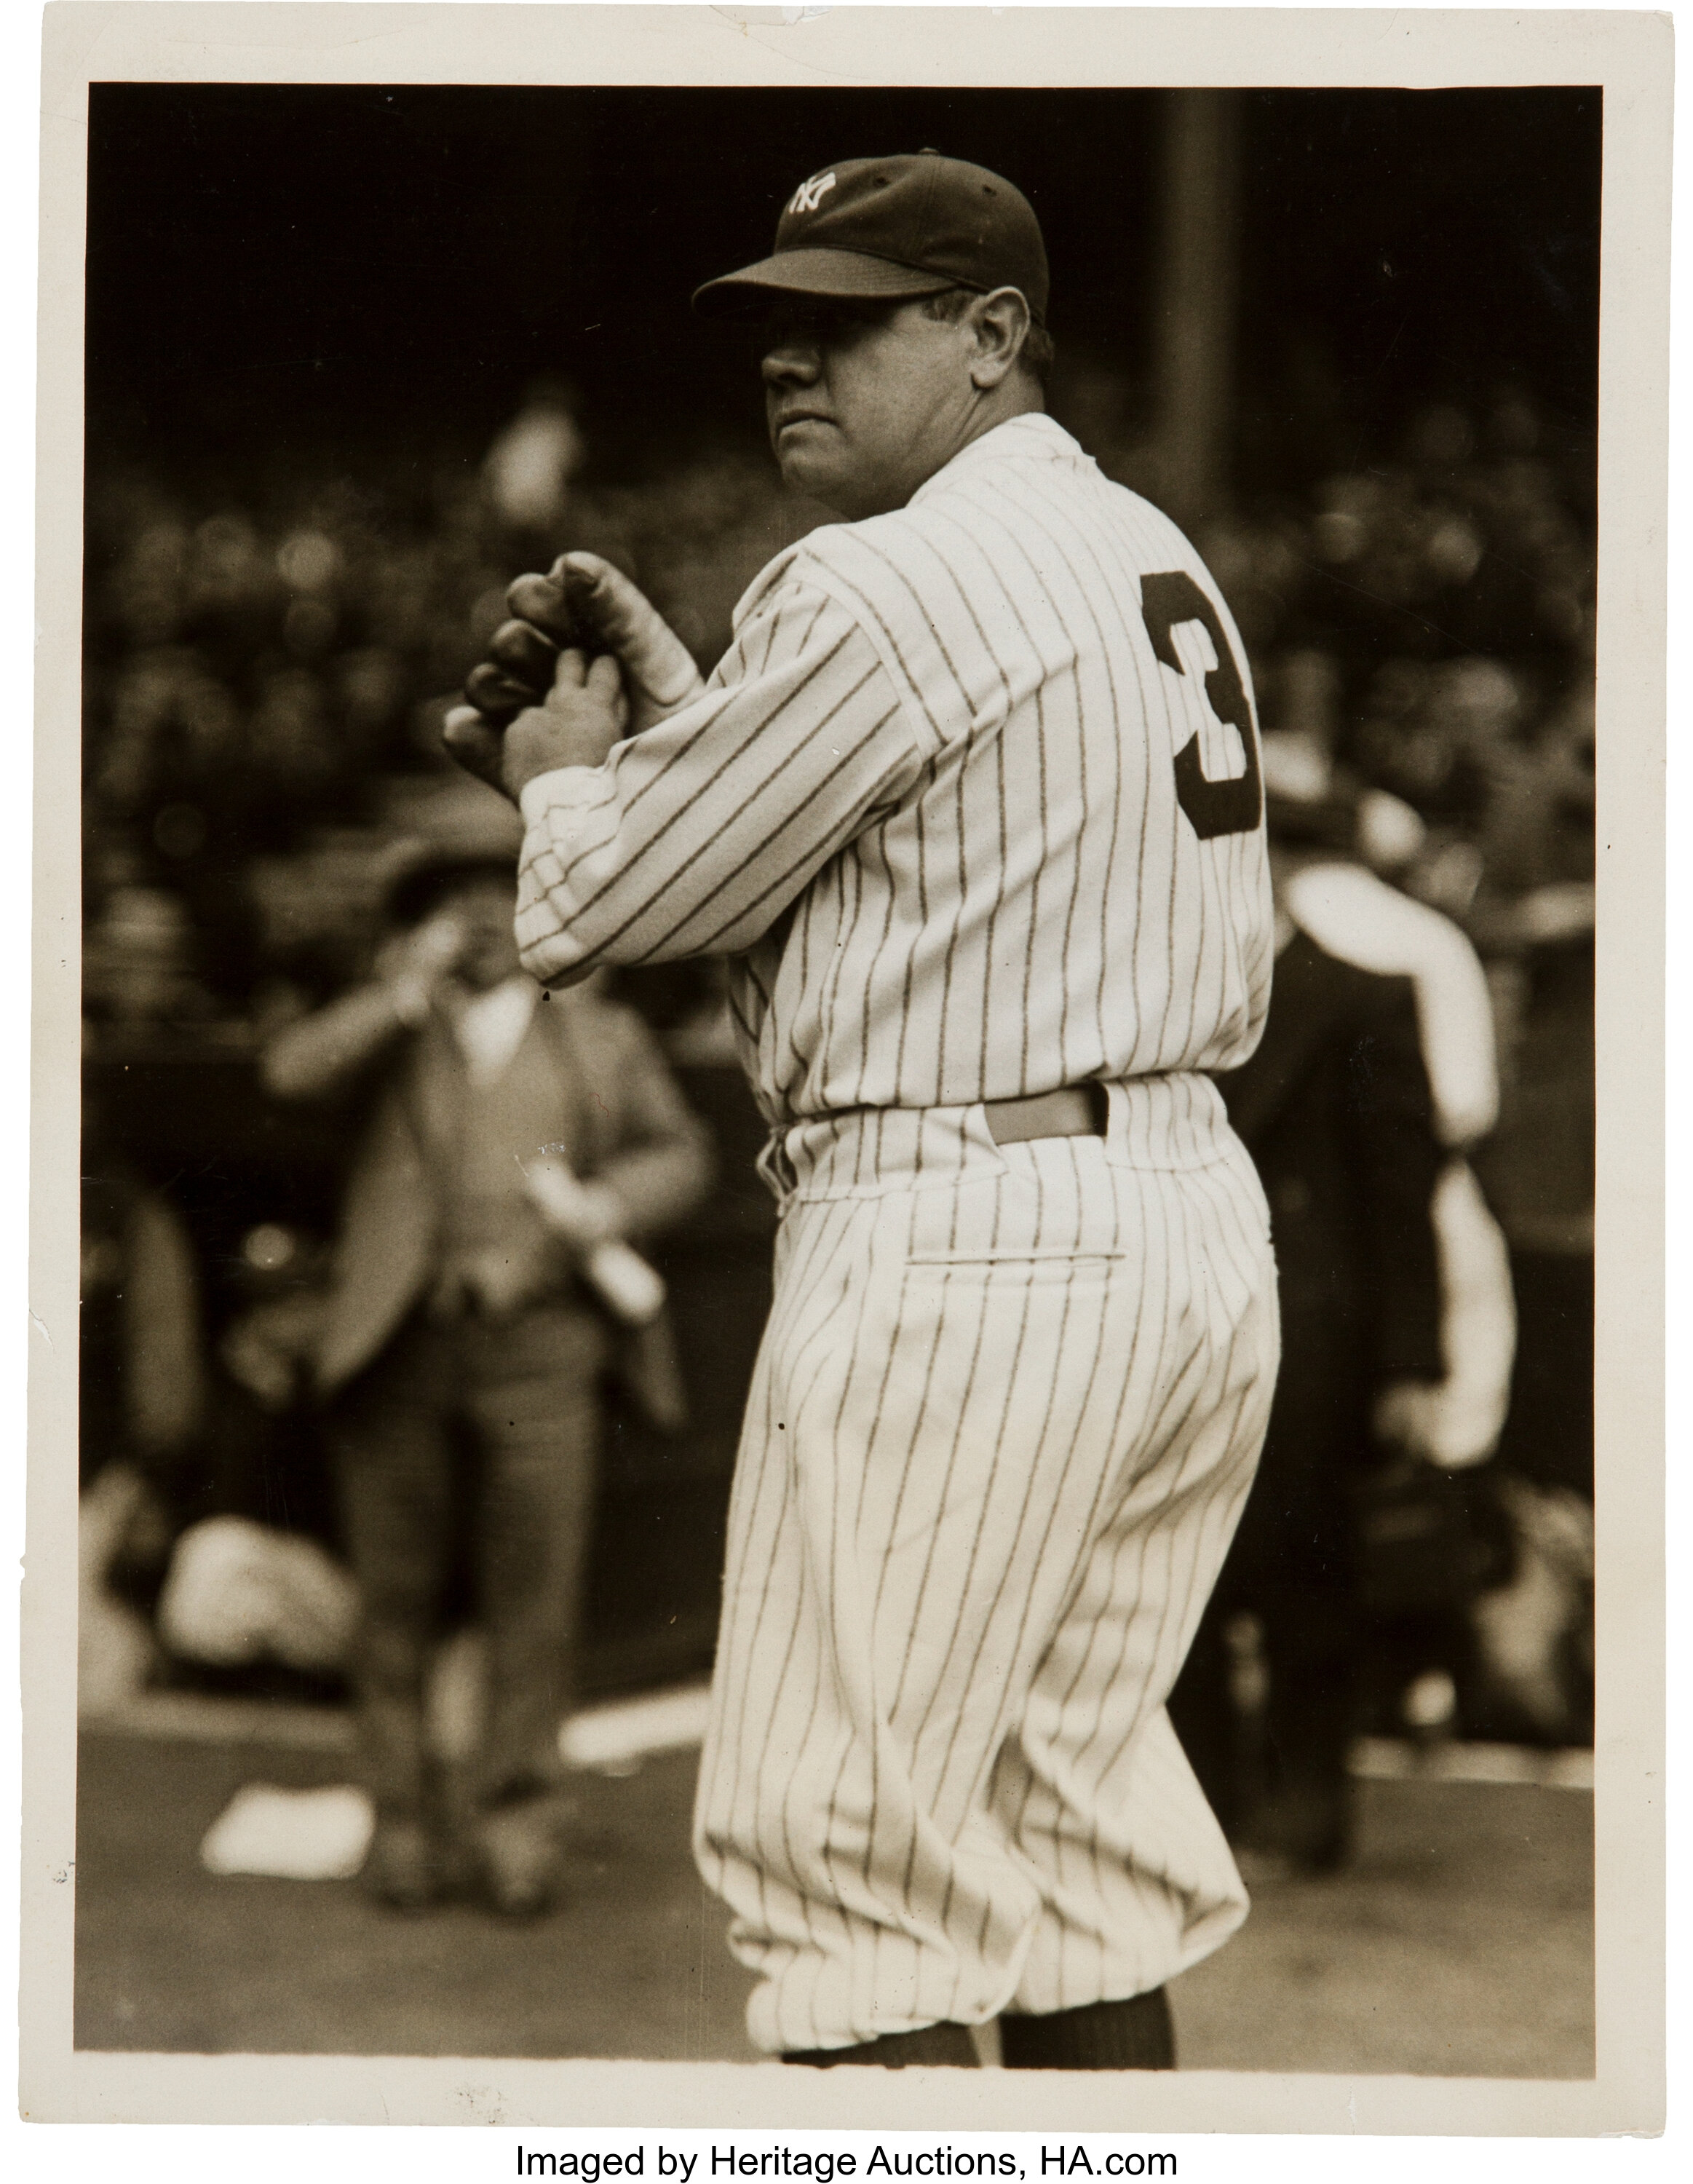 1929 Babe Ruth Original News Photograph, First Time Wearing Number